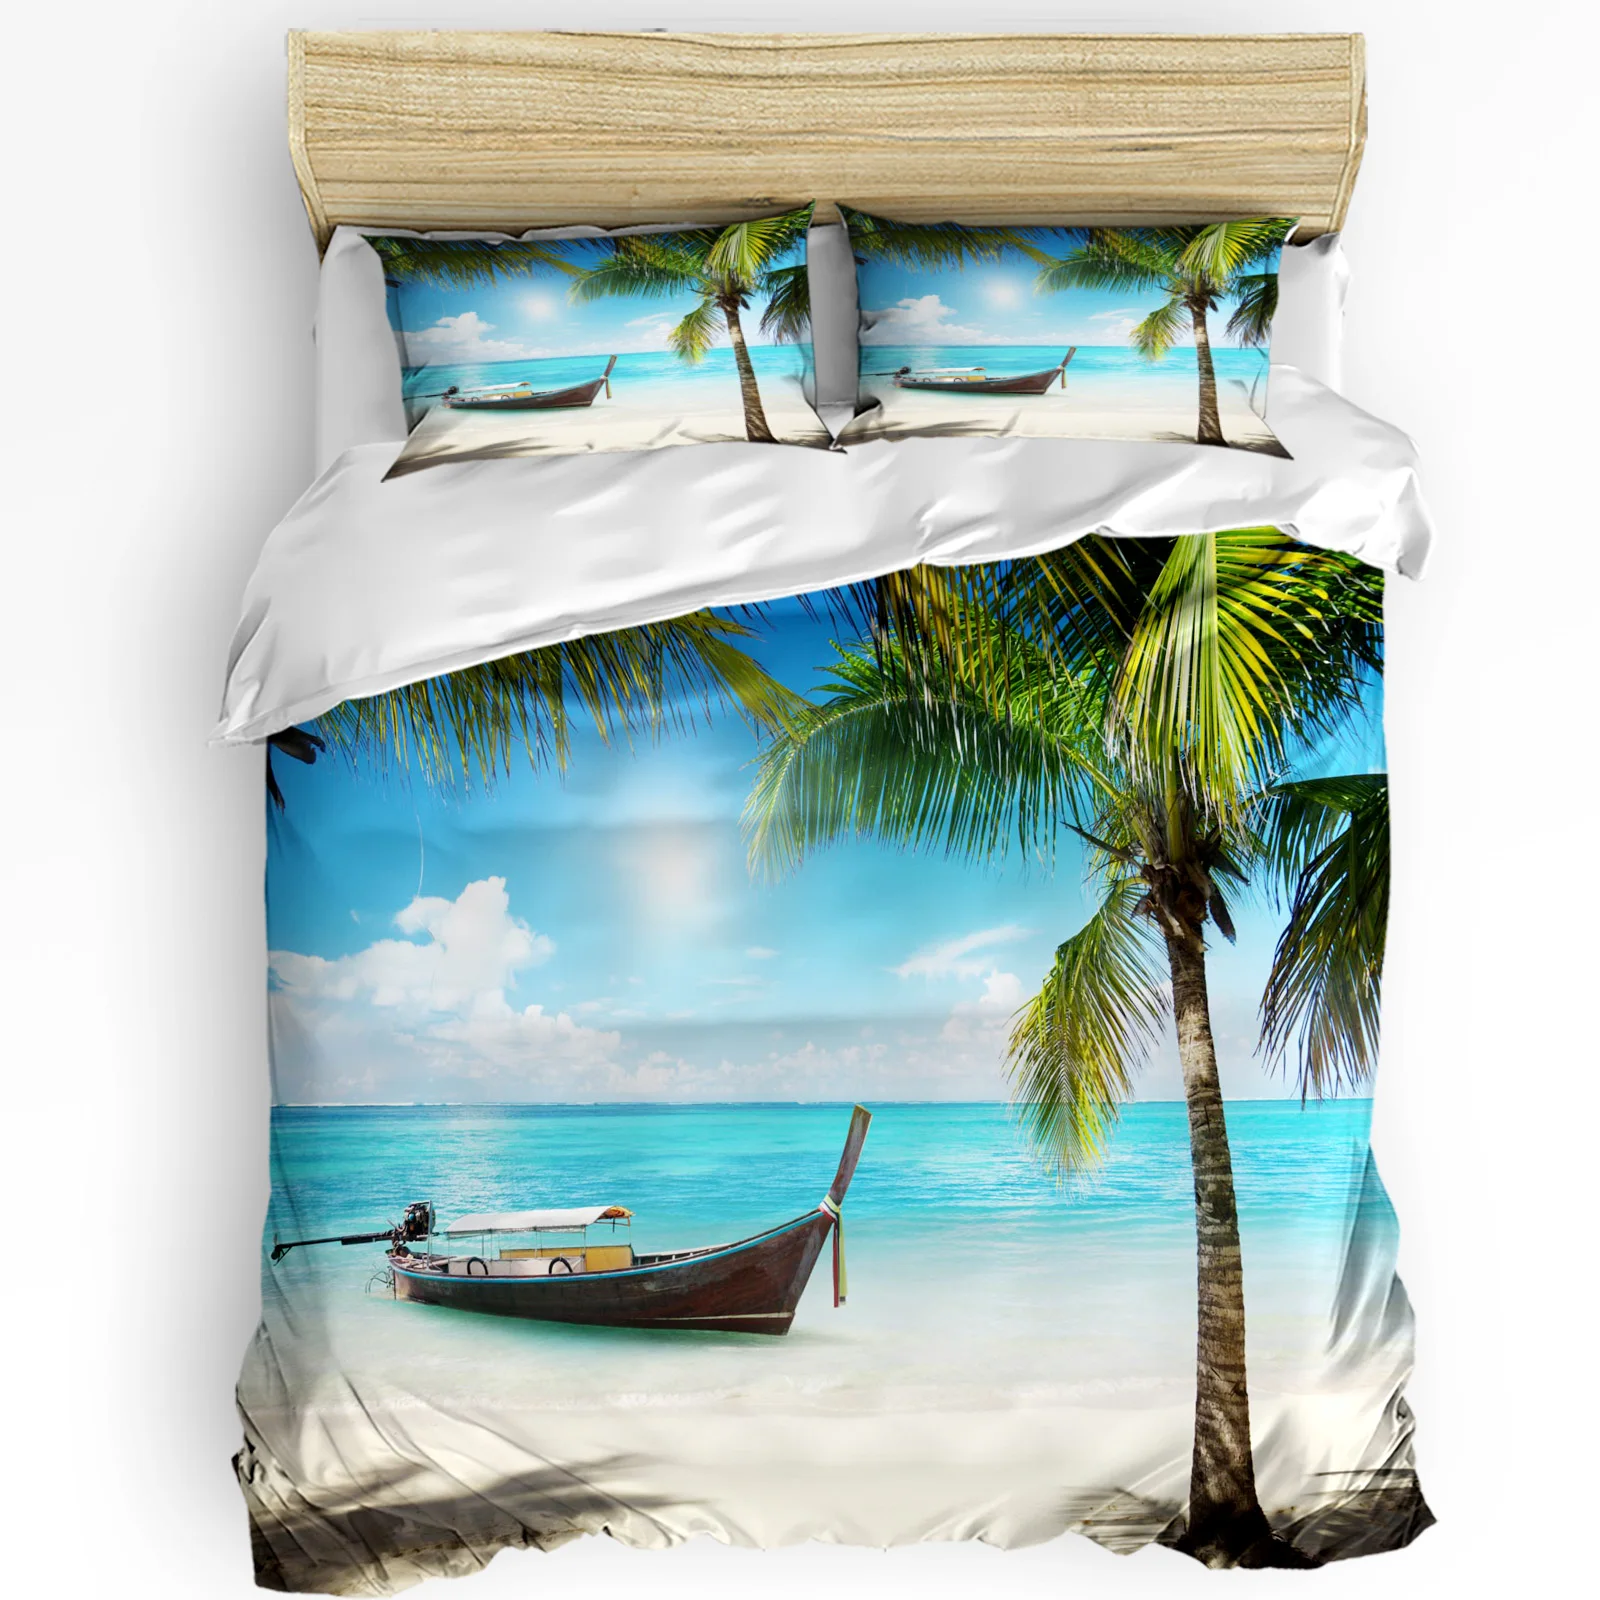 

Beach Coconut Tree Boat Printed Comfort Duvet Cover Pillow Case Home Textile Quilt Cover Boy Kid Teen Girl 3pcs Bedding Set